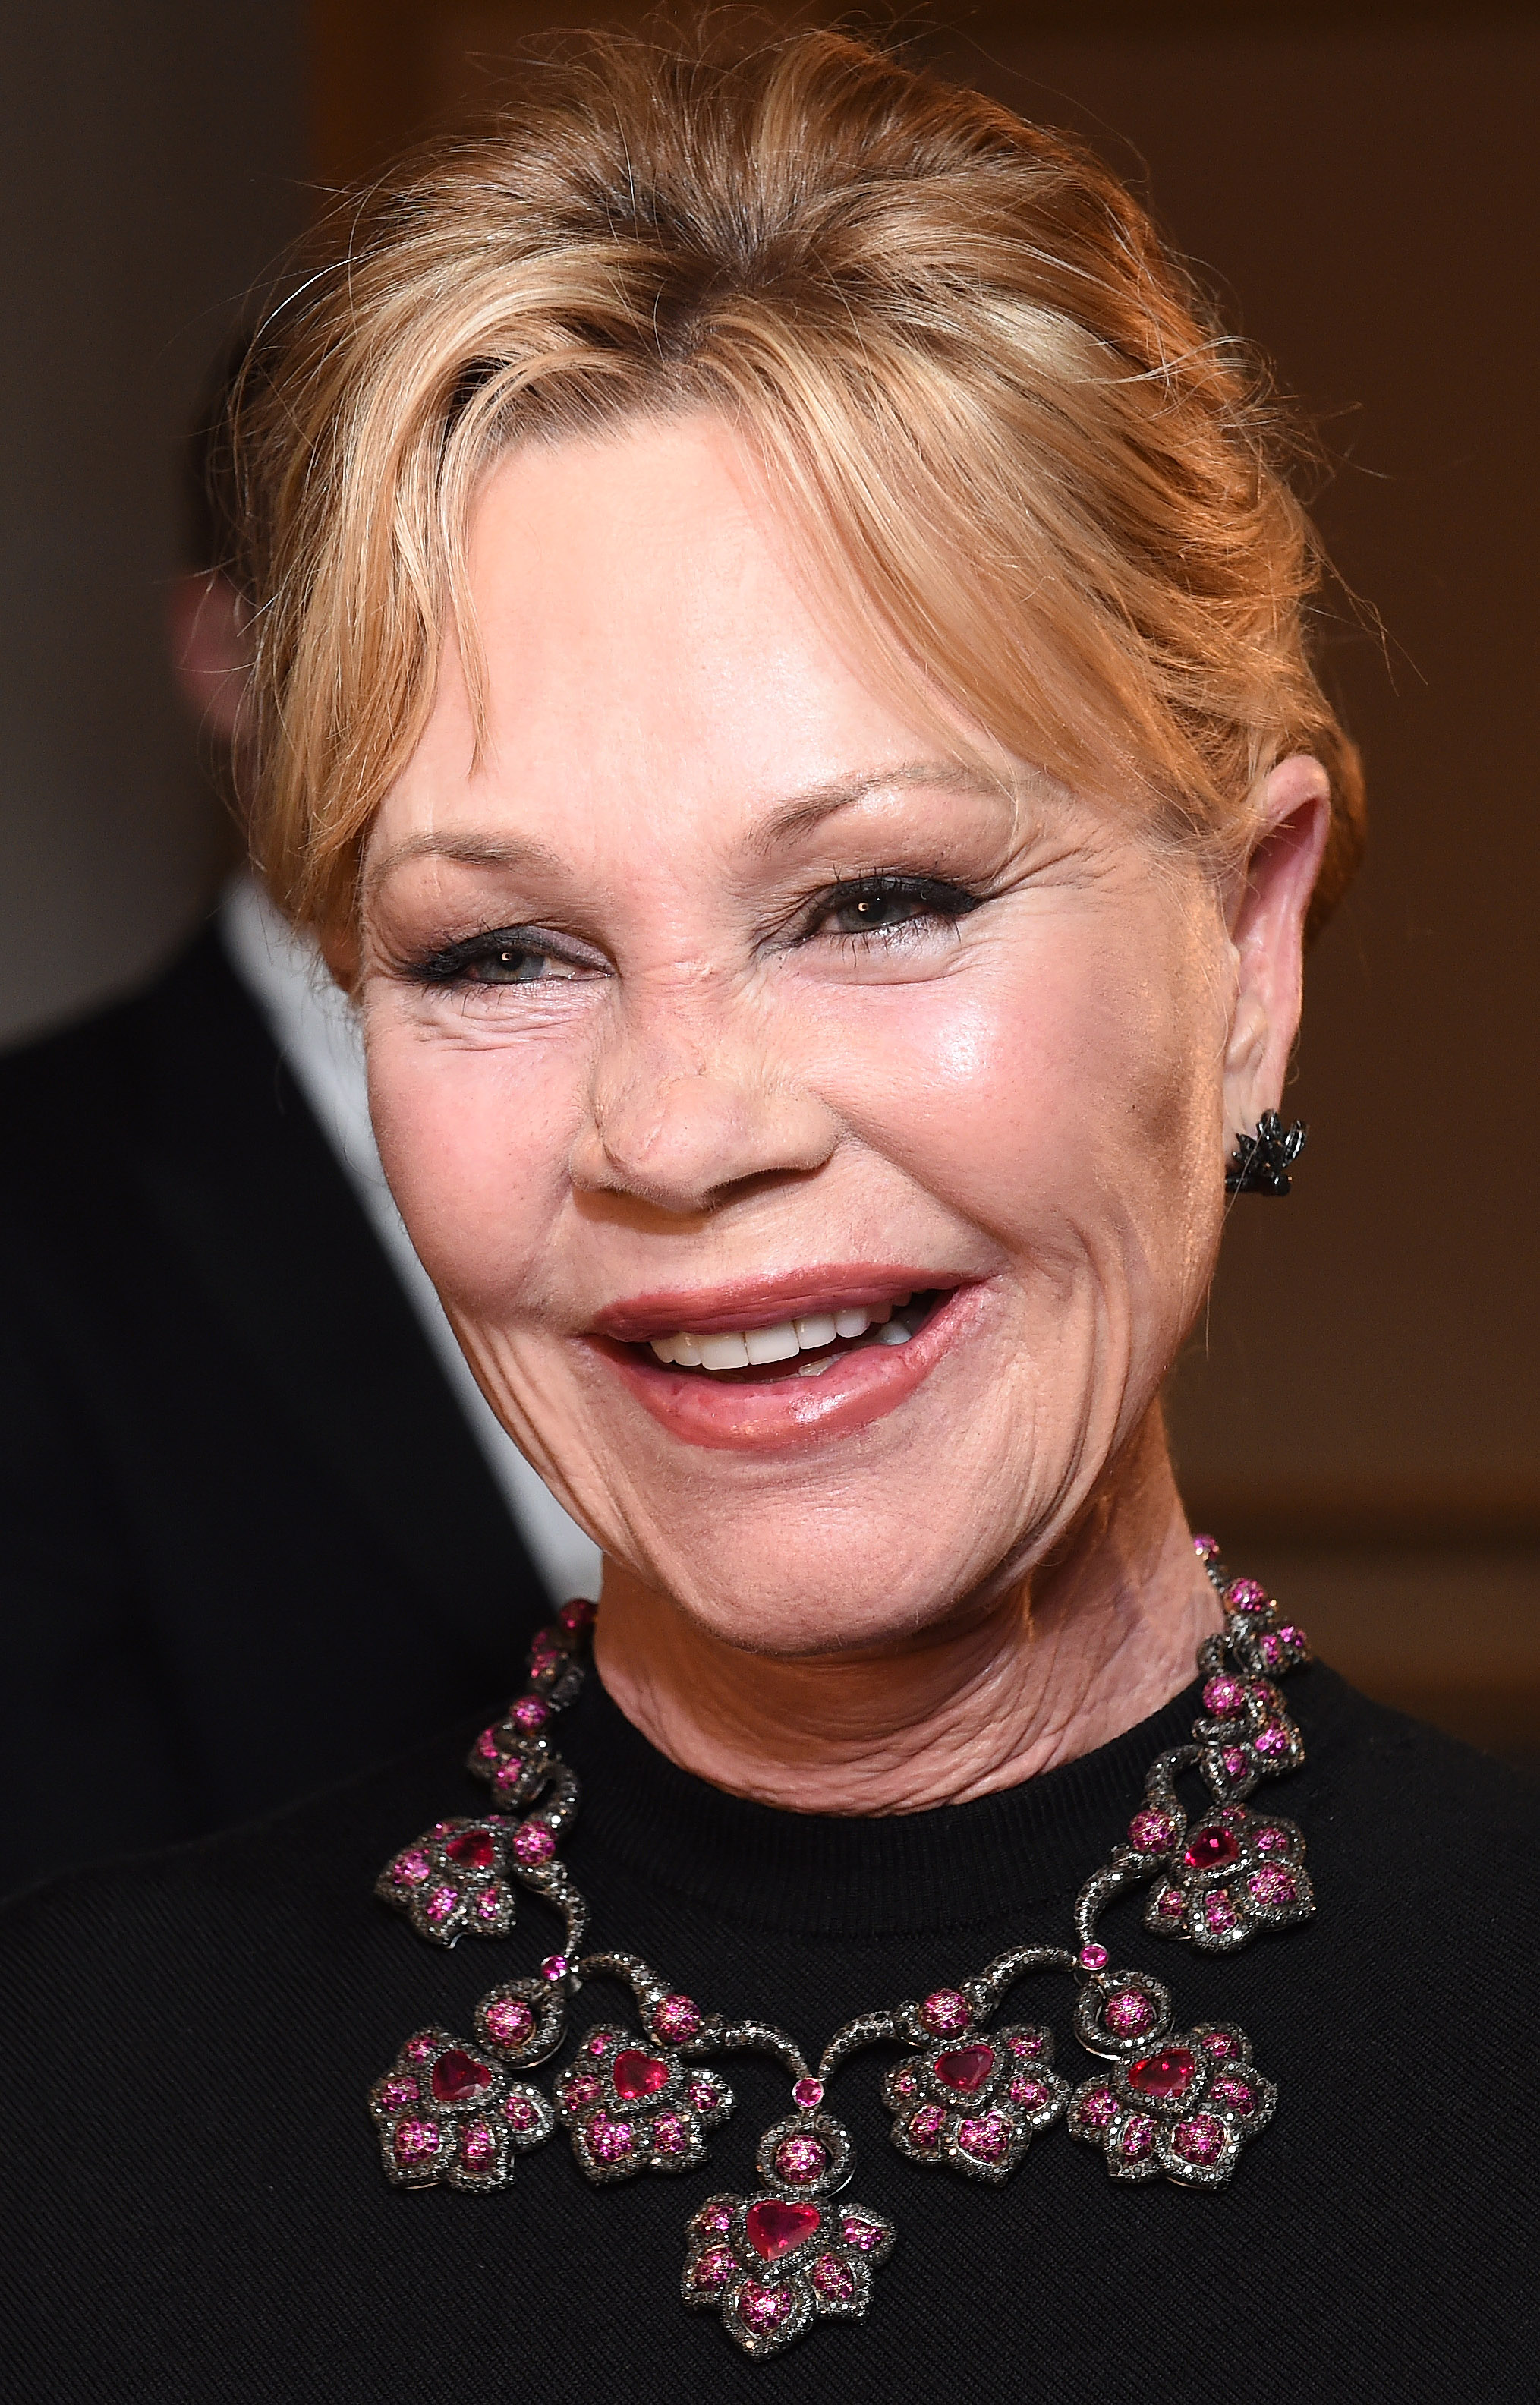 Melanie Griffith on February 8, 2018 in Vienna | Source: Getty Imaages